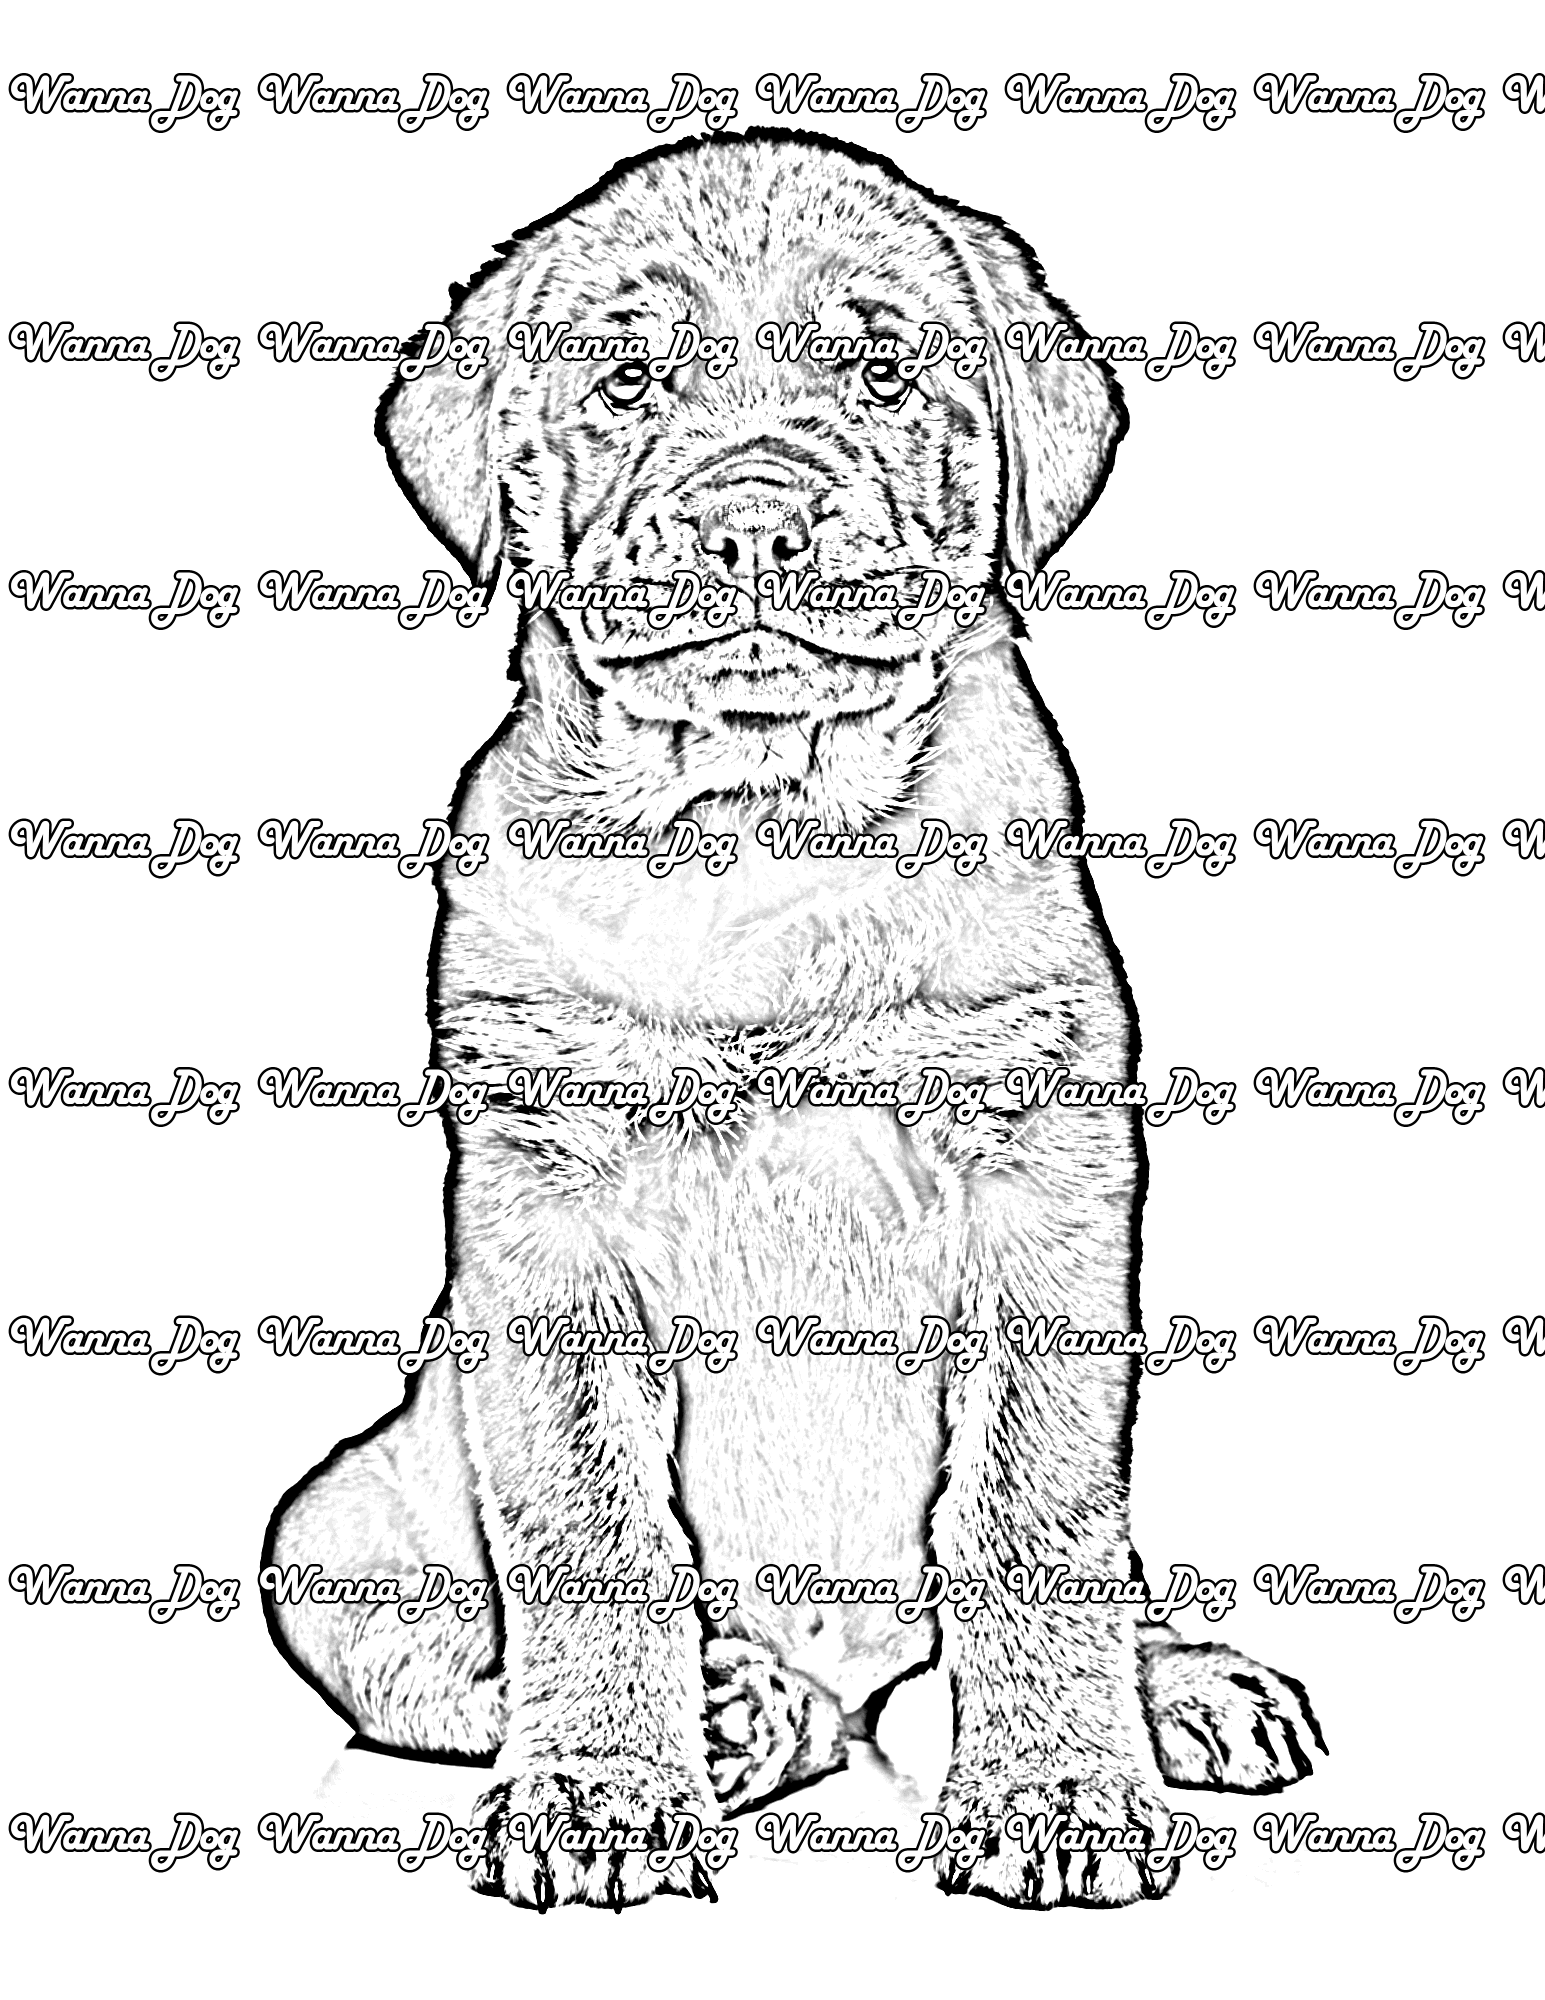 Rottweiler Puppy Coloring Page of a Rottweiler Puppy posing for the camera